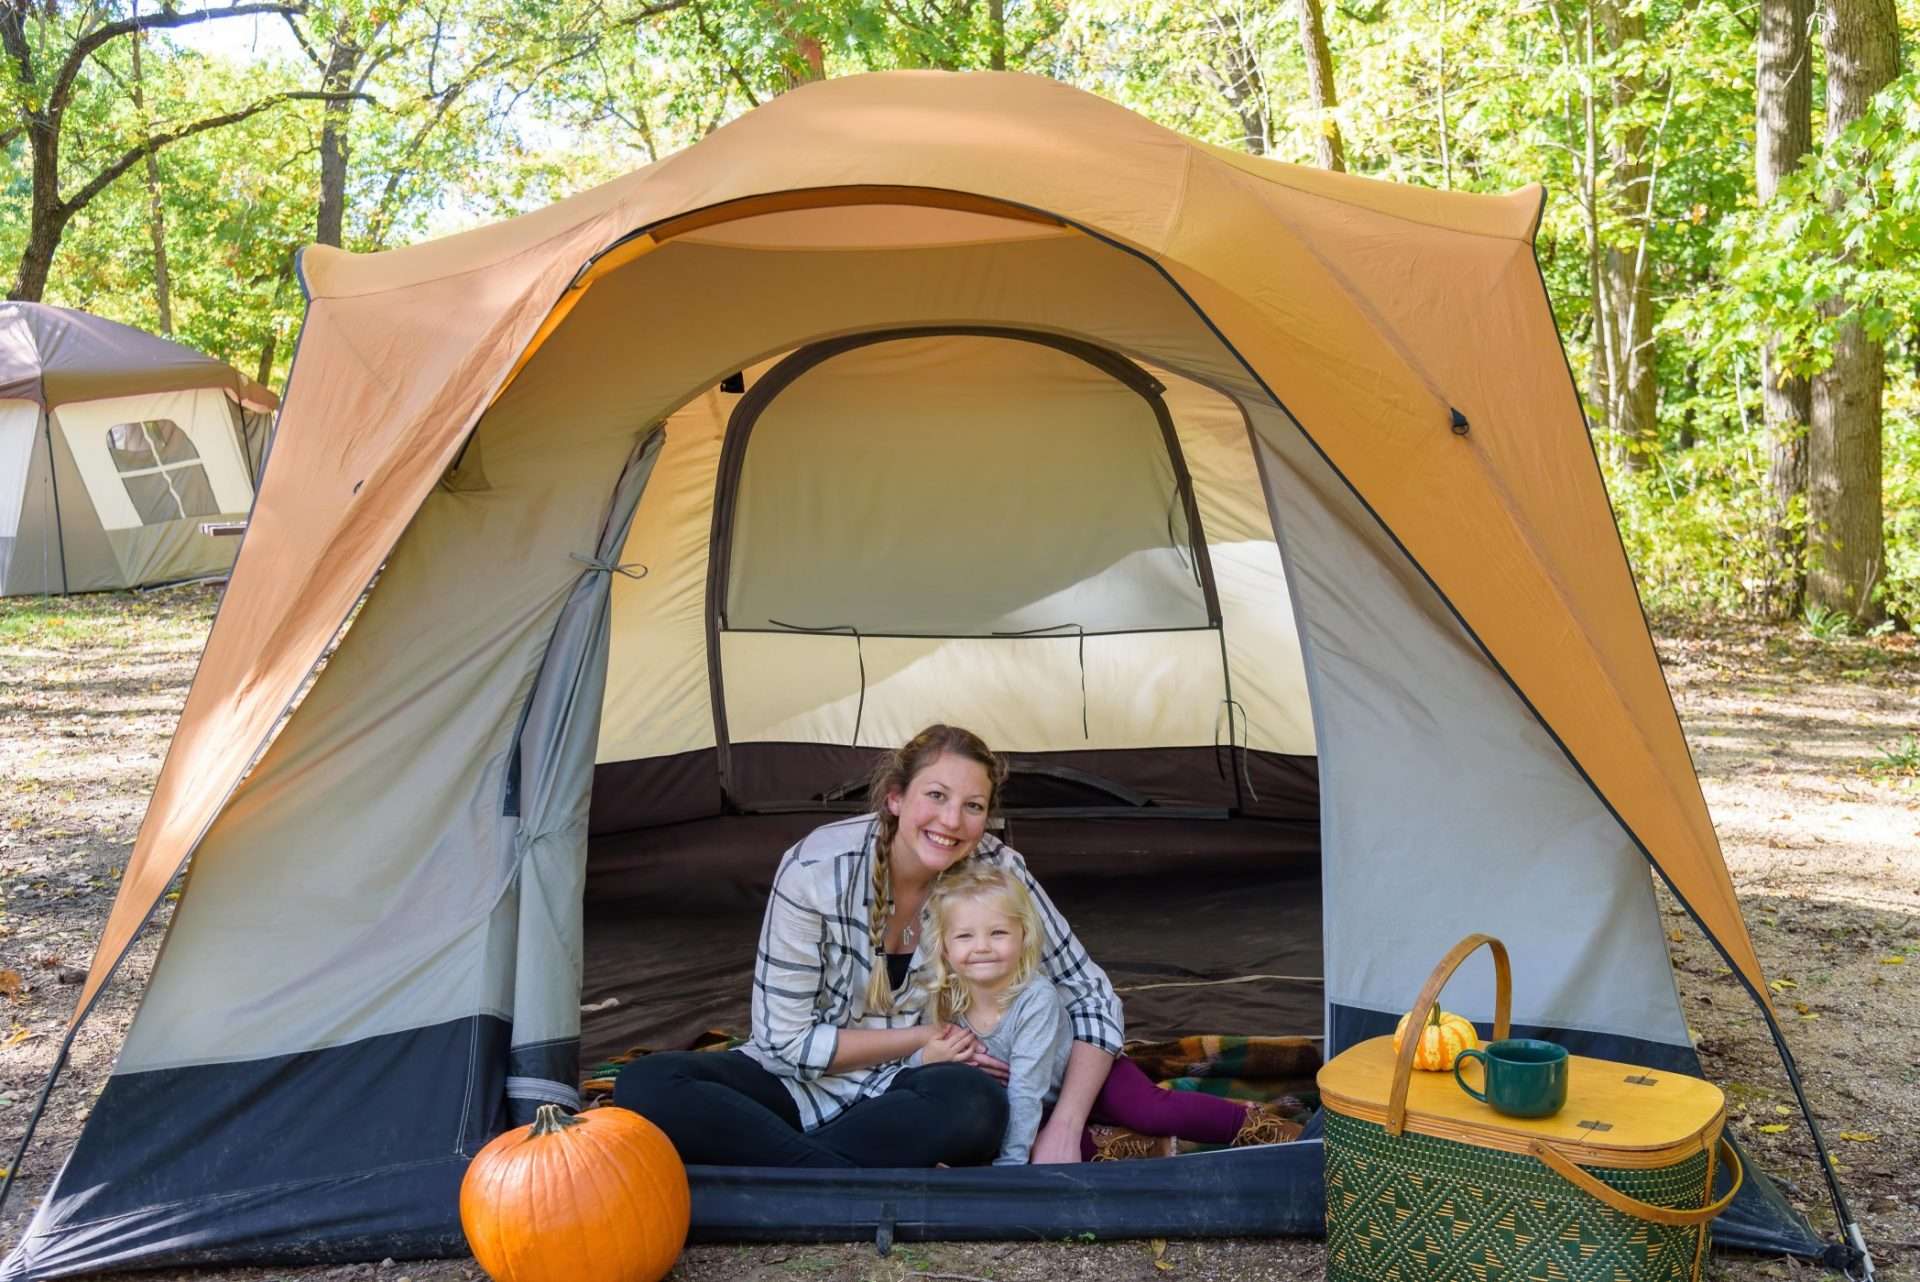 Mom and daughter sitting together inside tent while camping